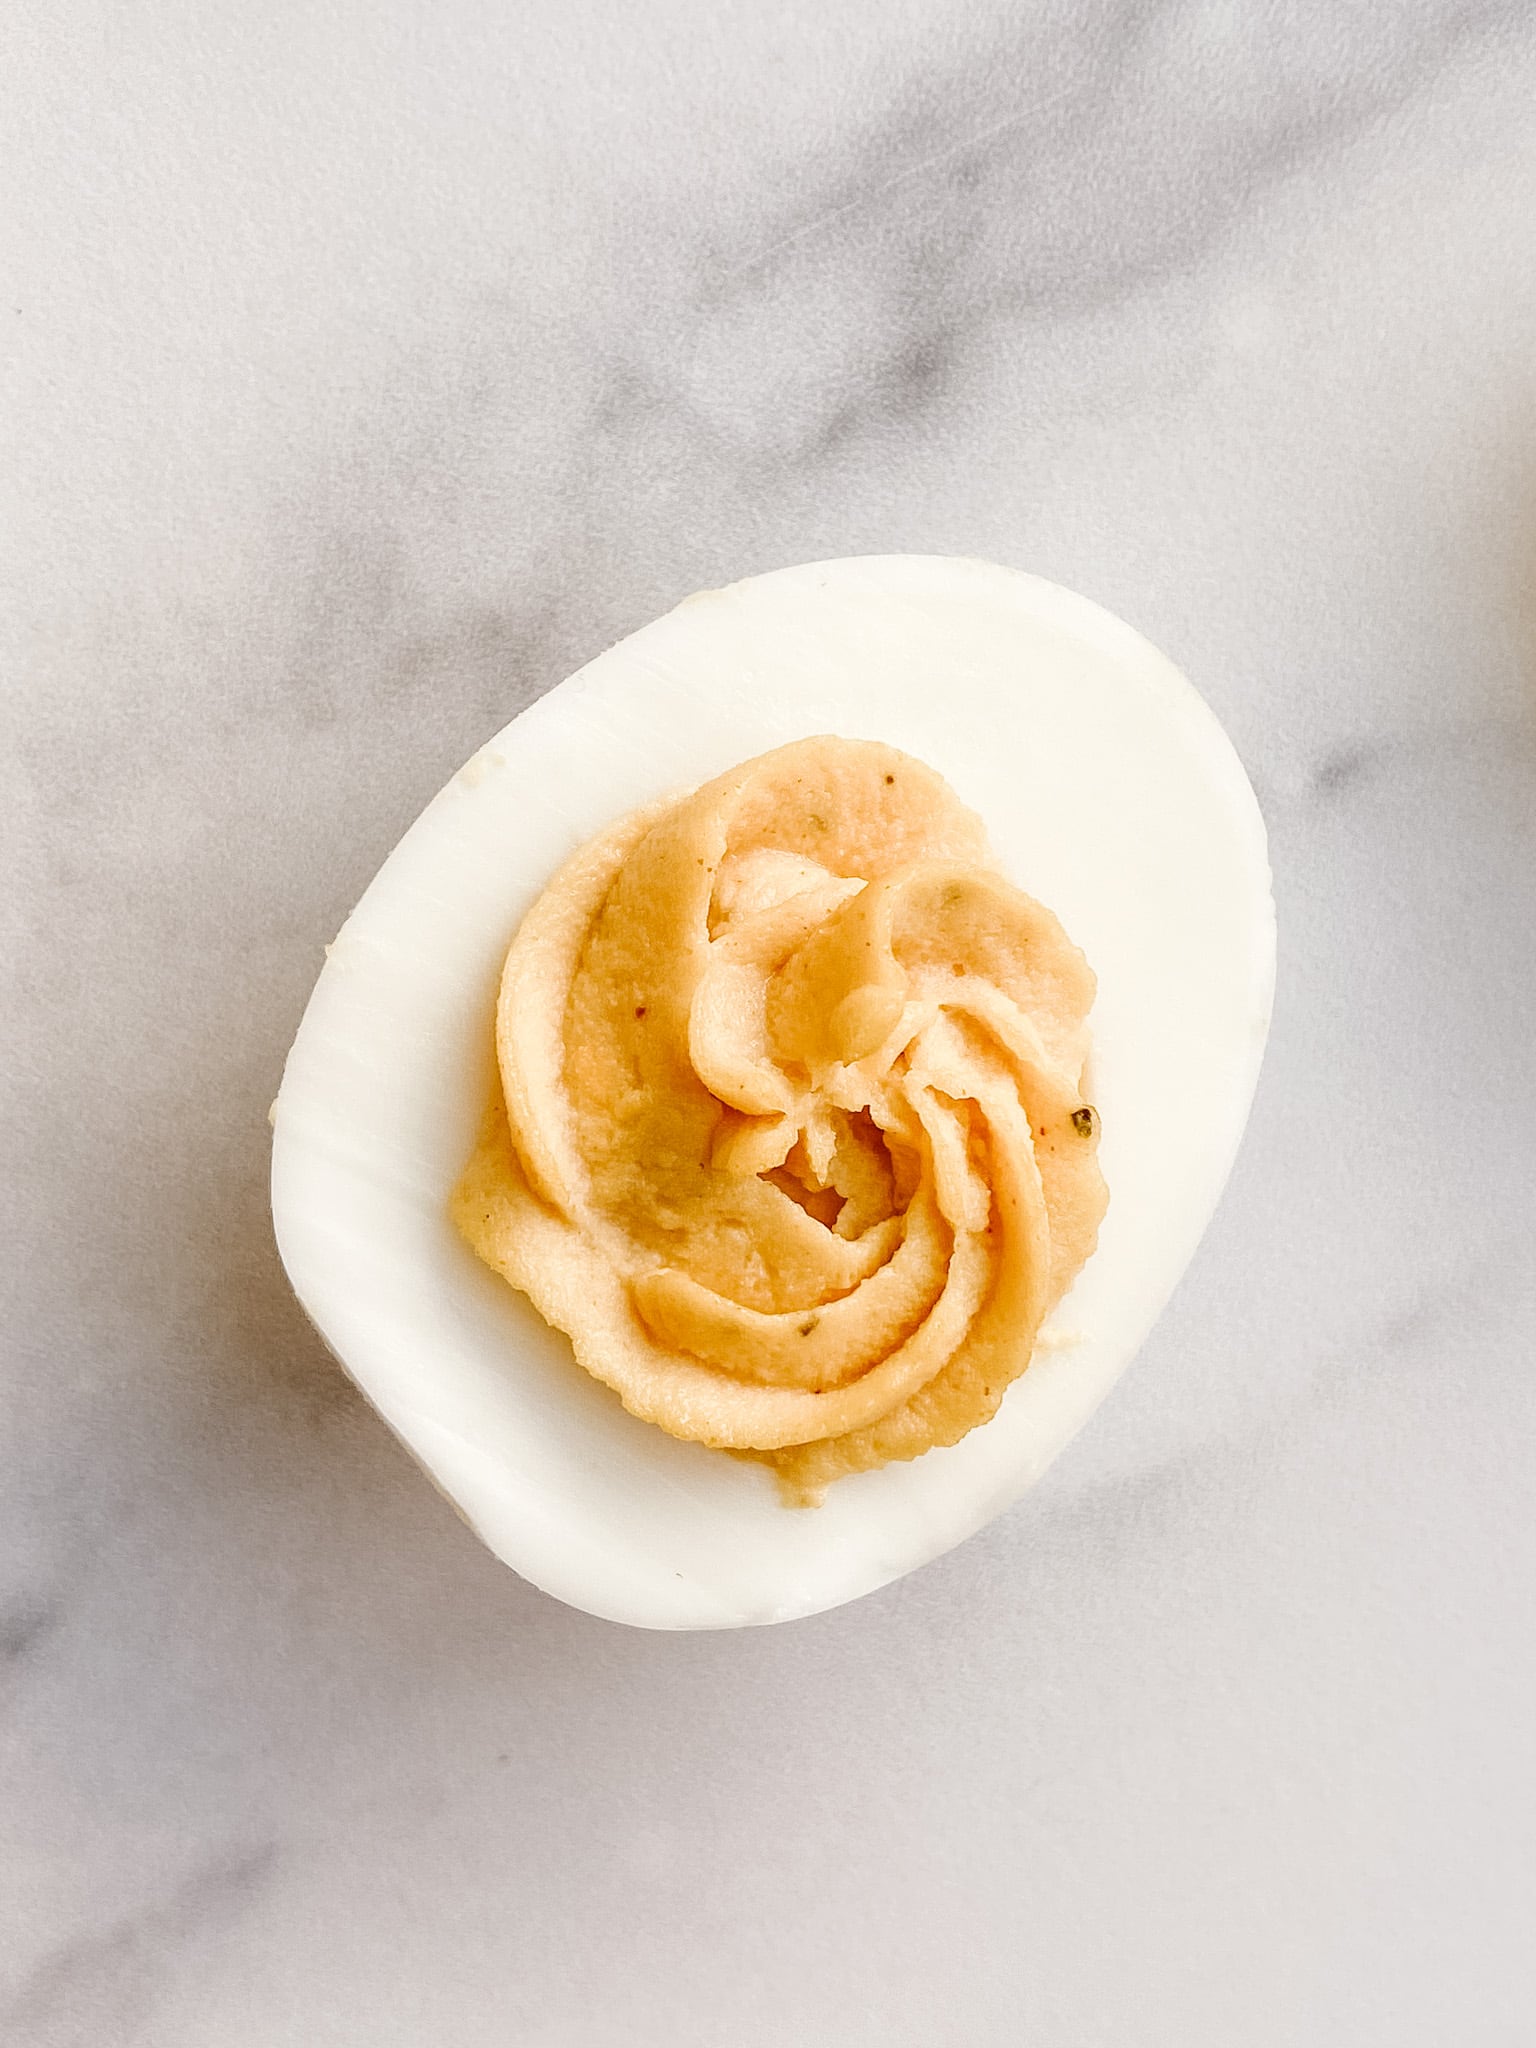 A single classic deviled egg close up. You can see the swirl of the yolk from the piping bag used to fill in the egg.